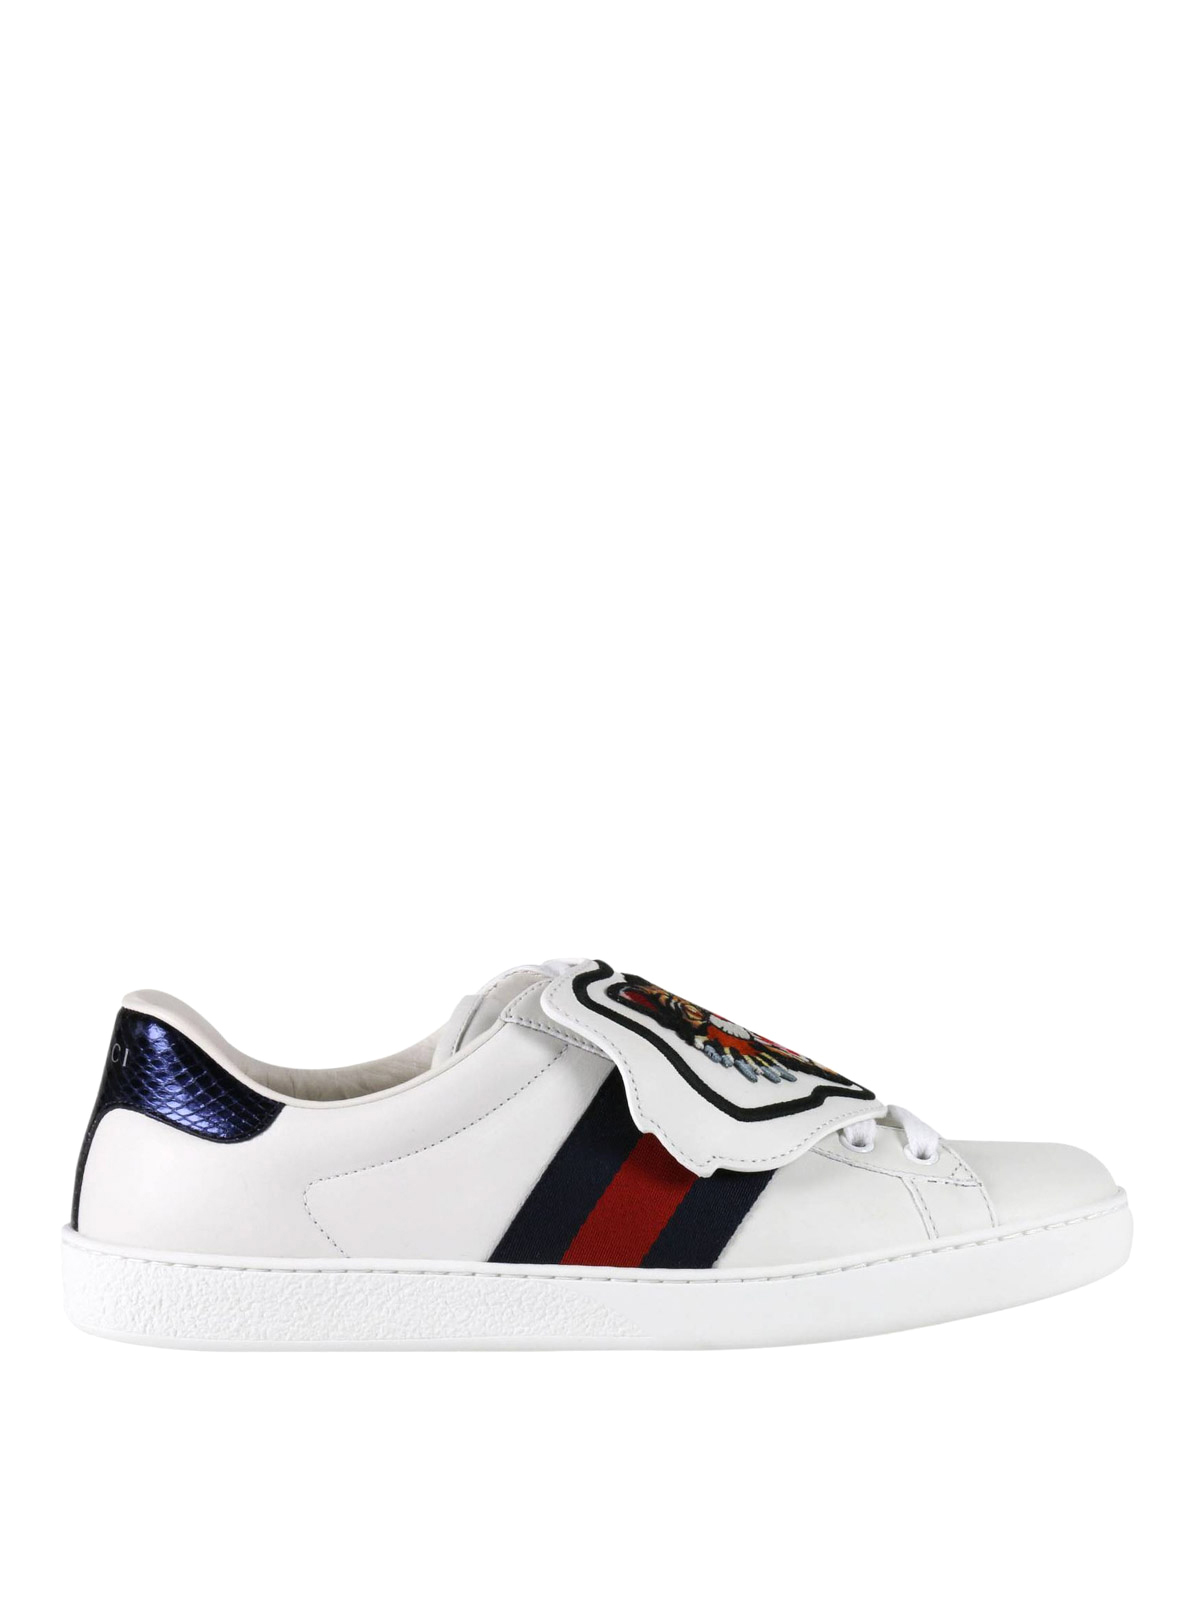 Gucci - Ace removable patch sneakers 